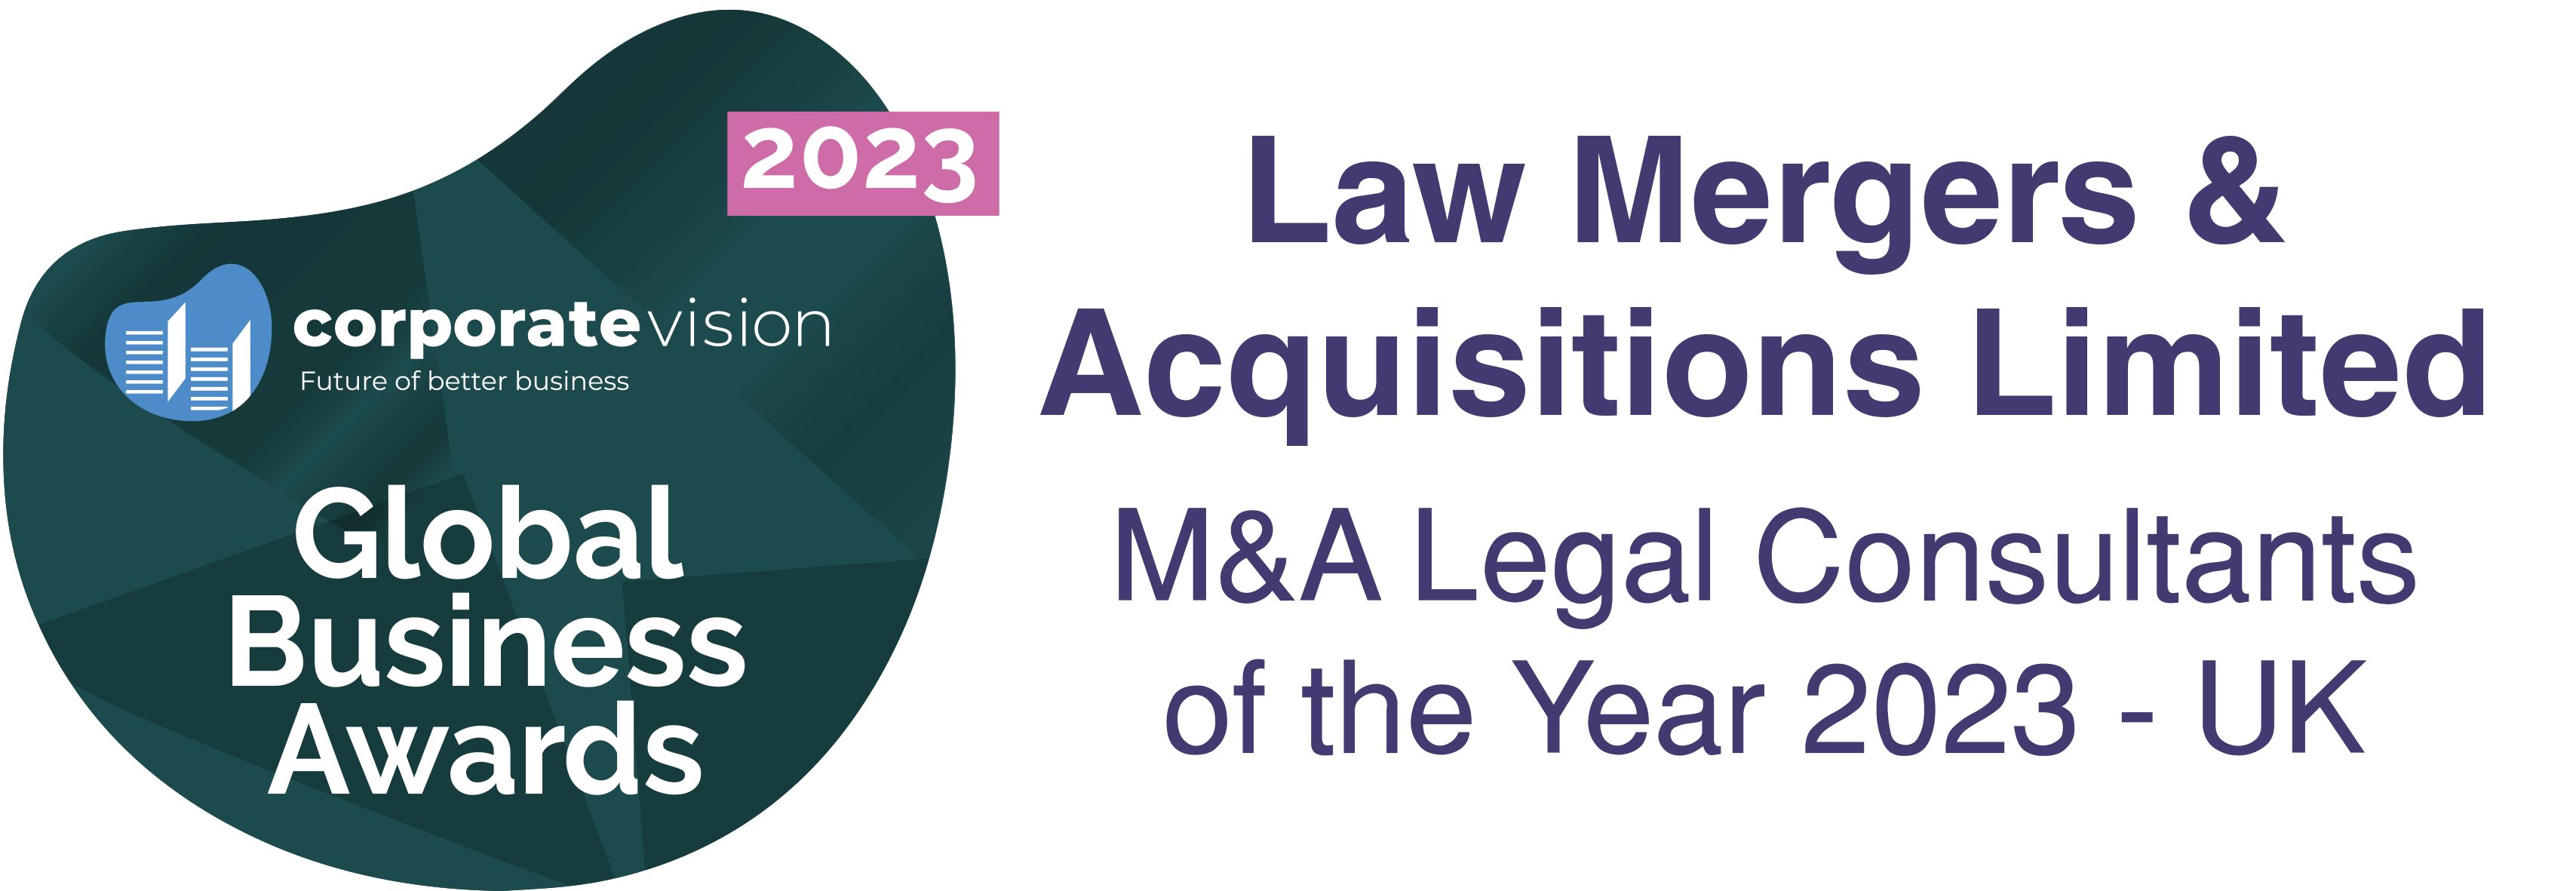 Aug23202_Law Mergers & Acquisitions Limited_Badge (2)